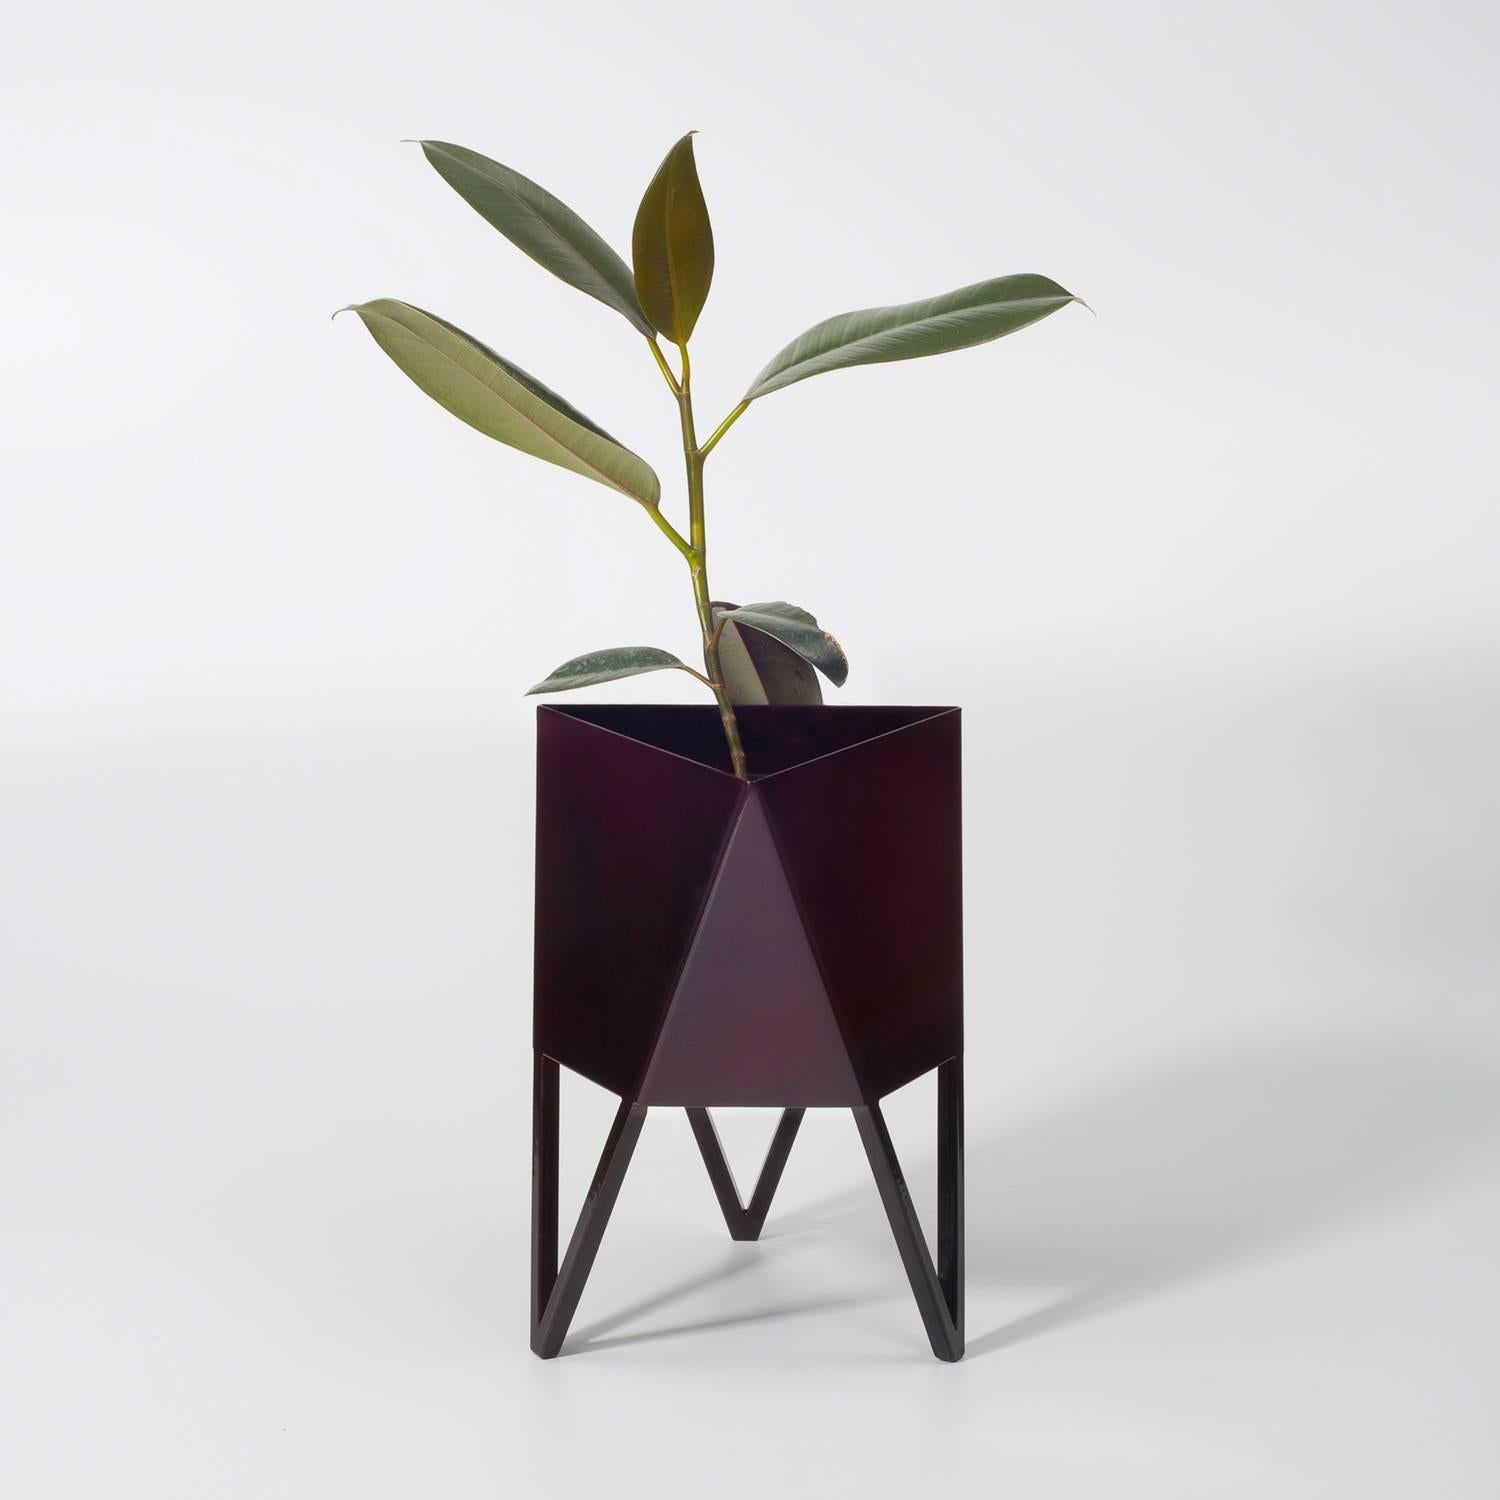 Contemporary Deca Planter in Bluegreen Steel, Large, by Force/Collide